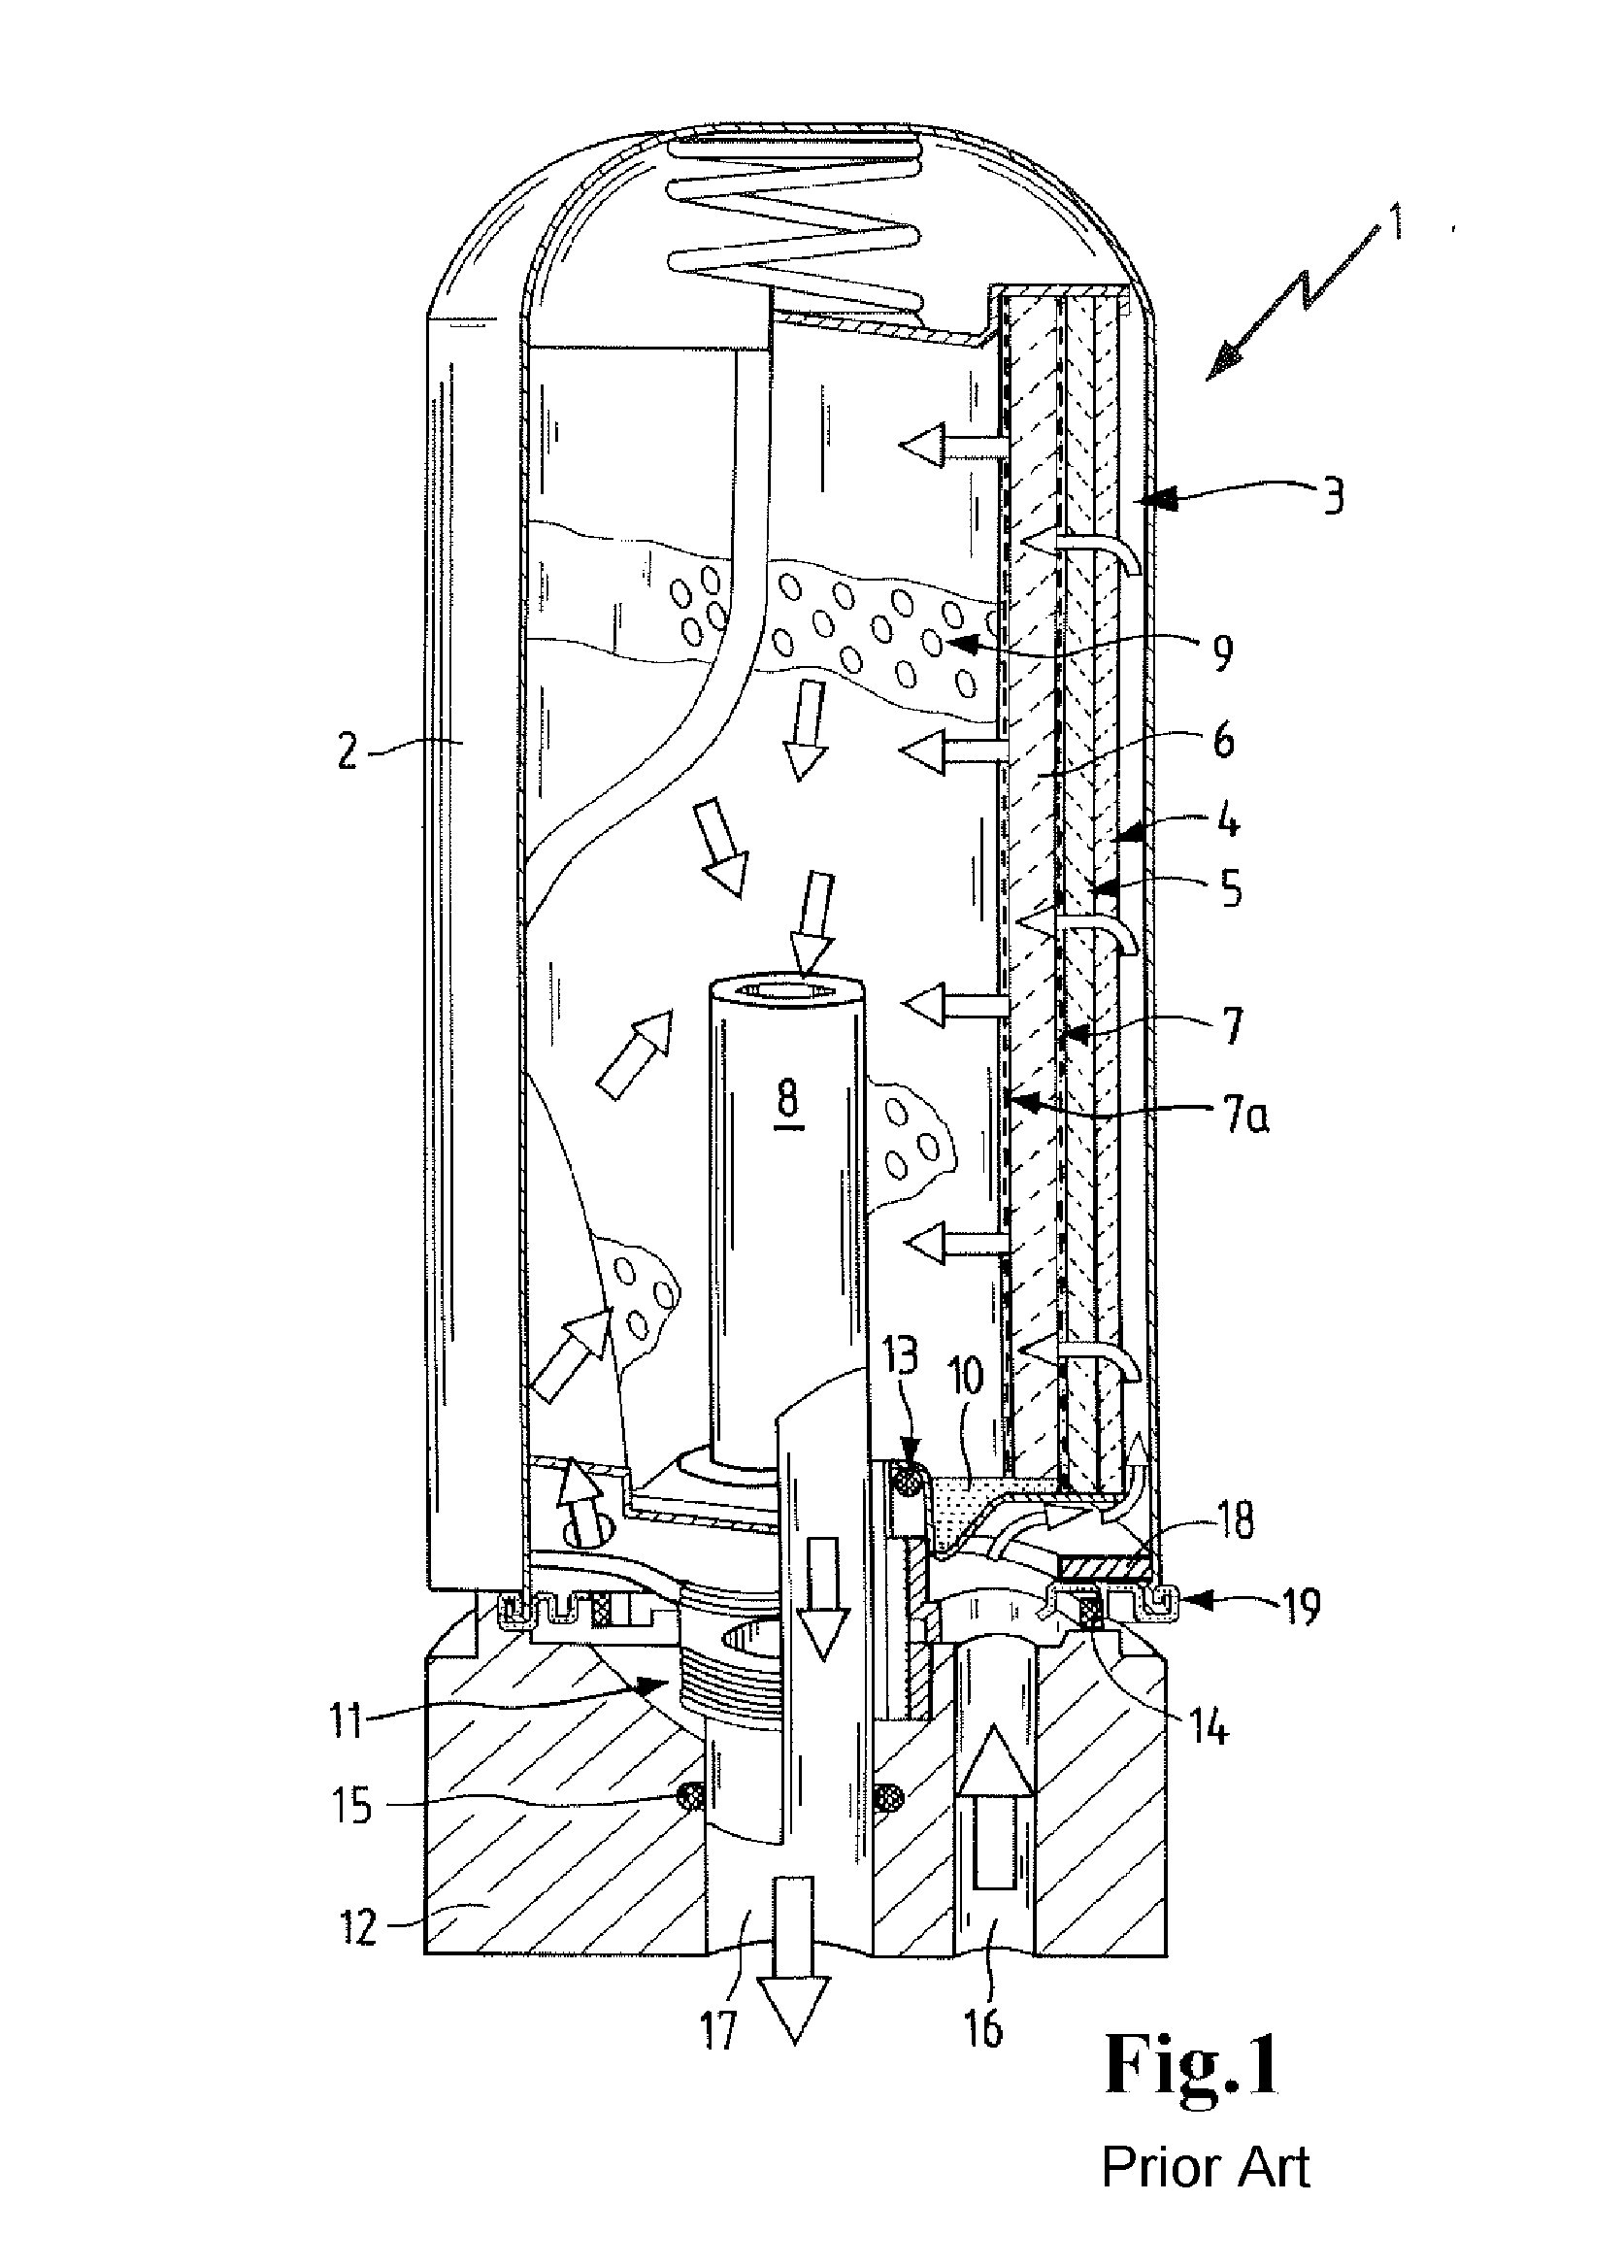 Filter closure system with bayonet closure